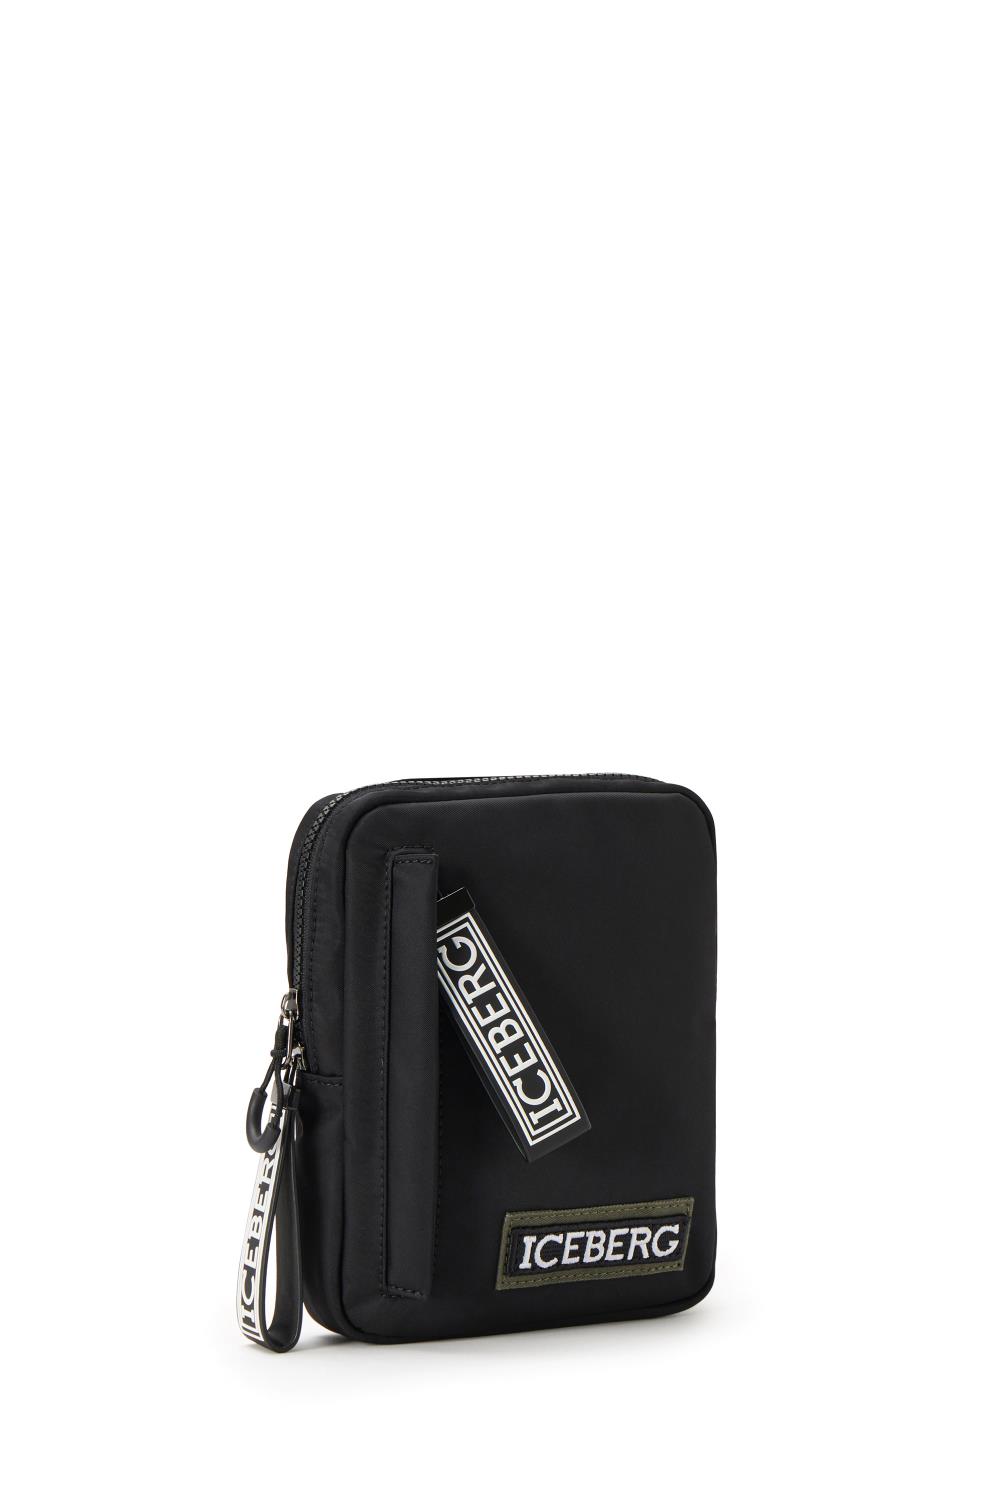 Phone pouch with institutional logo - Iceberg - Official Website